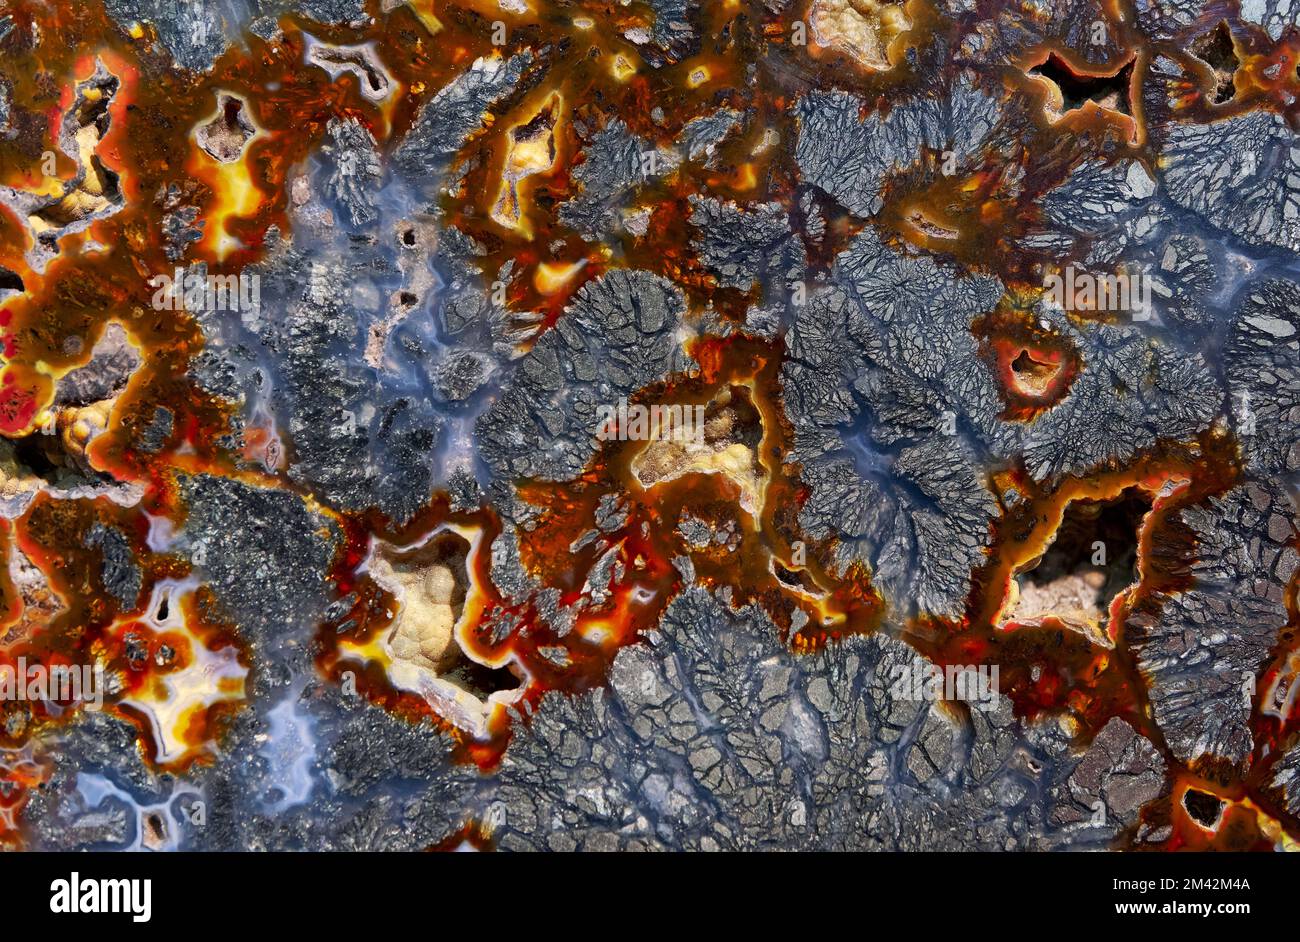 Backgrounds and textures: surface of beautiful decorative stone, abstract colorful red and blue mineral pattern with cracks, spots and stains, natural Stock Photo